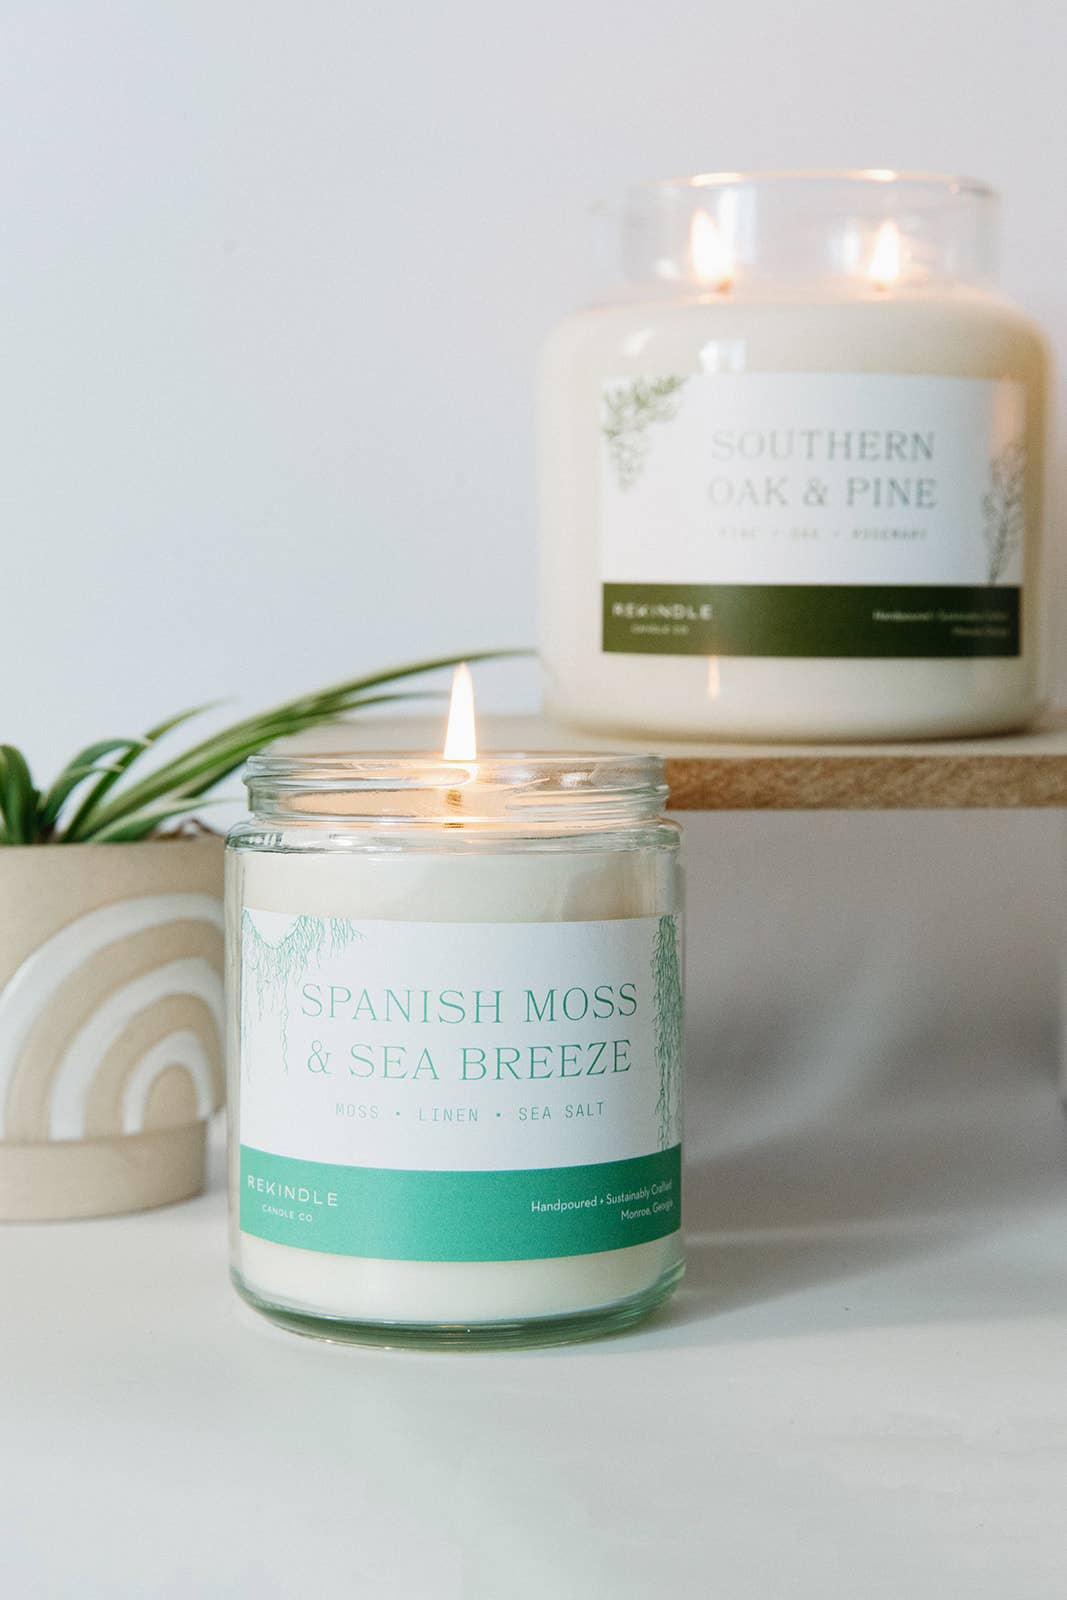 Spanish Moss + Sea Breeze Cotton Wick Soy Candle